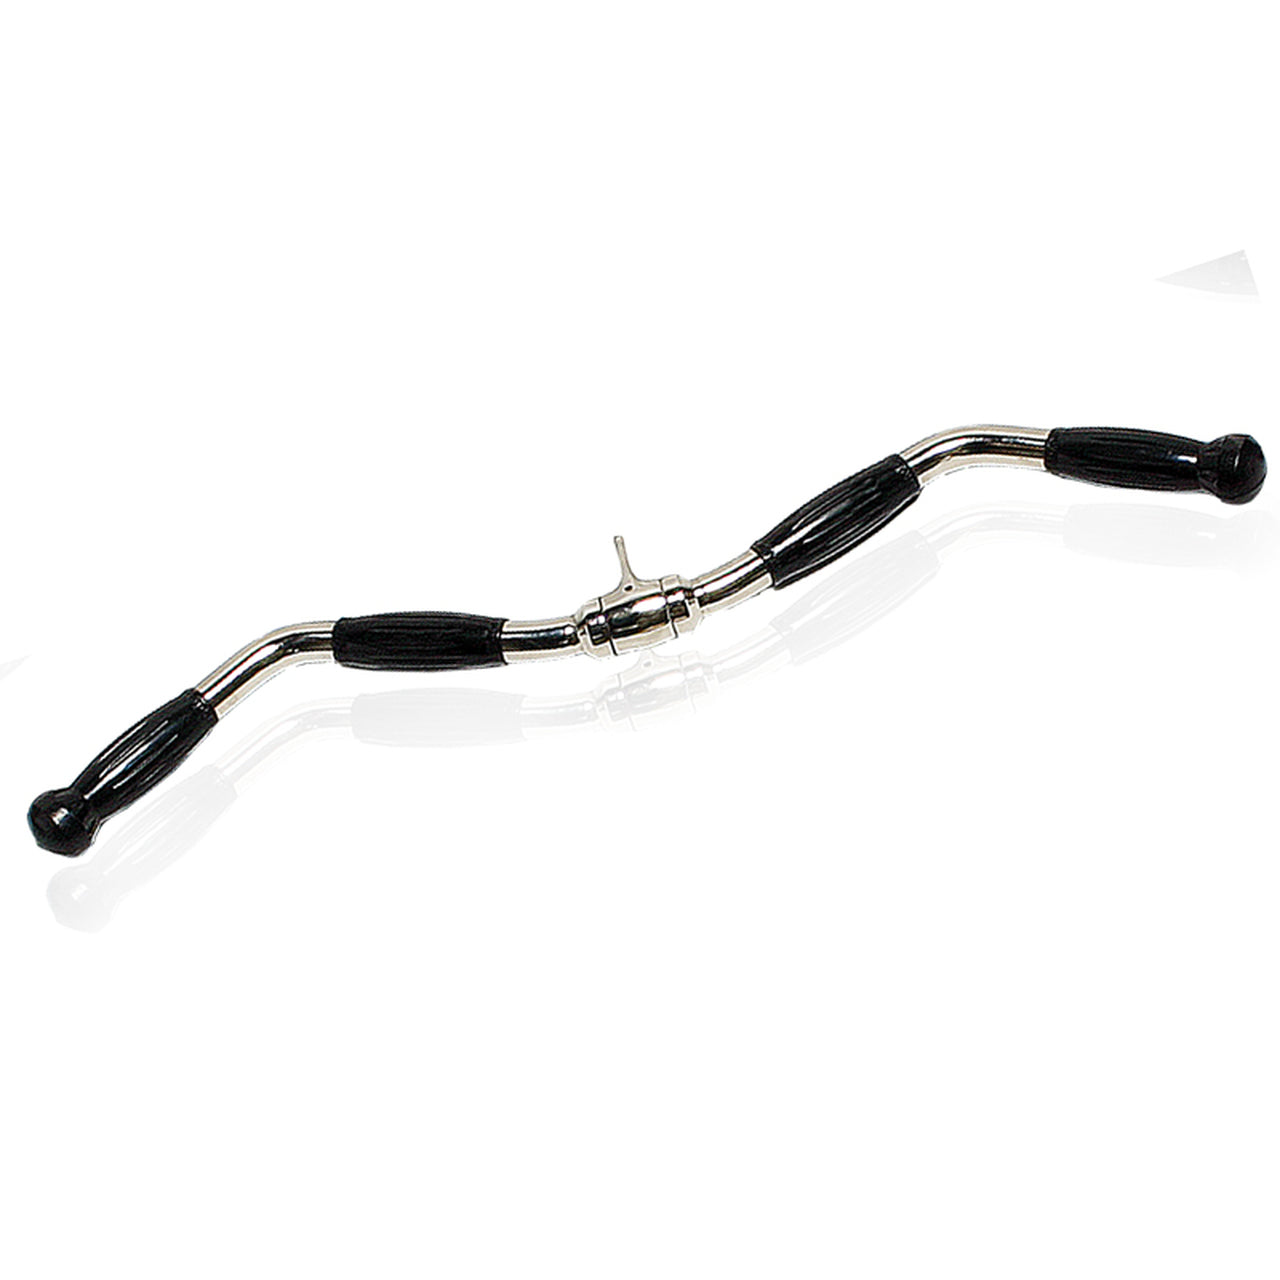 SFE Curl Bar with Rubber Handgrips and Revolving Hanger, 28 in